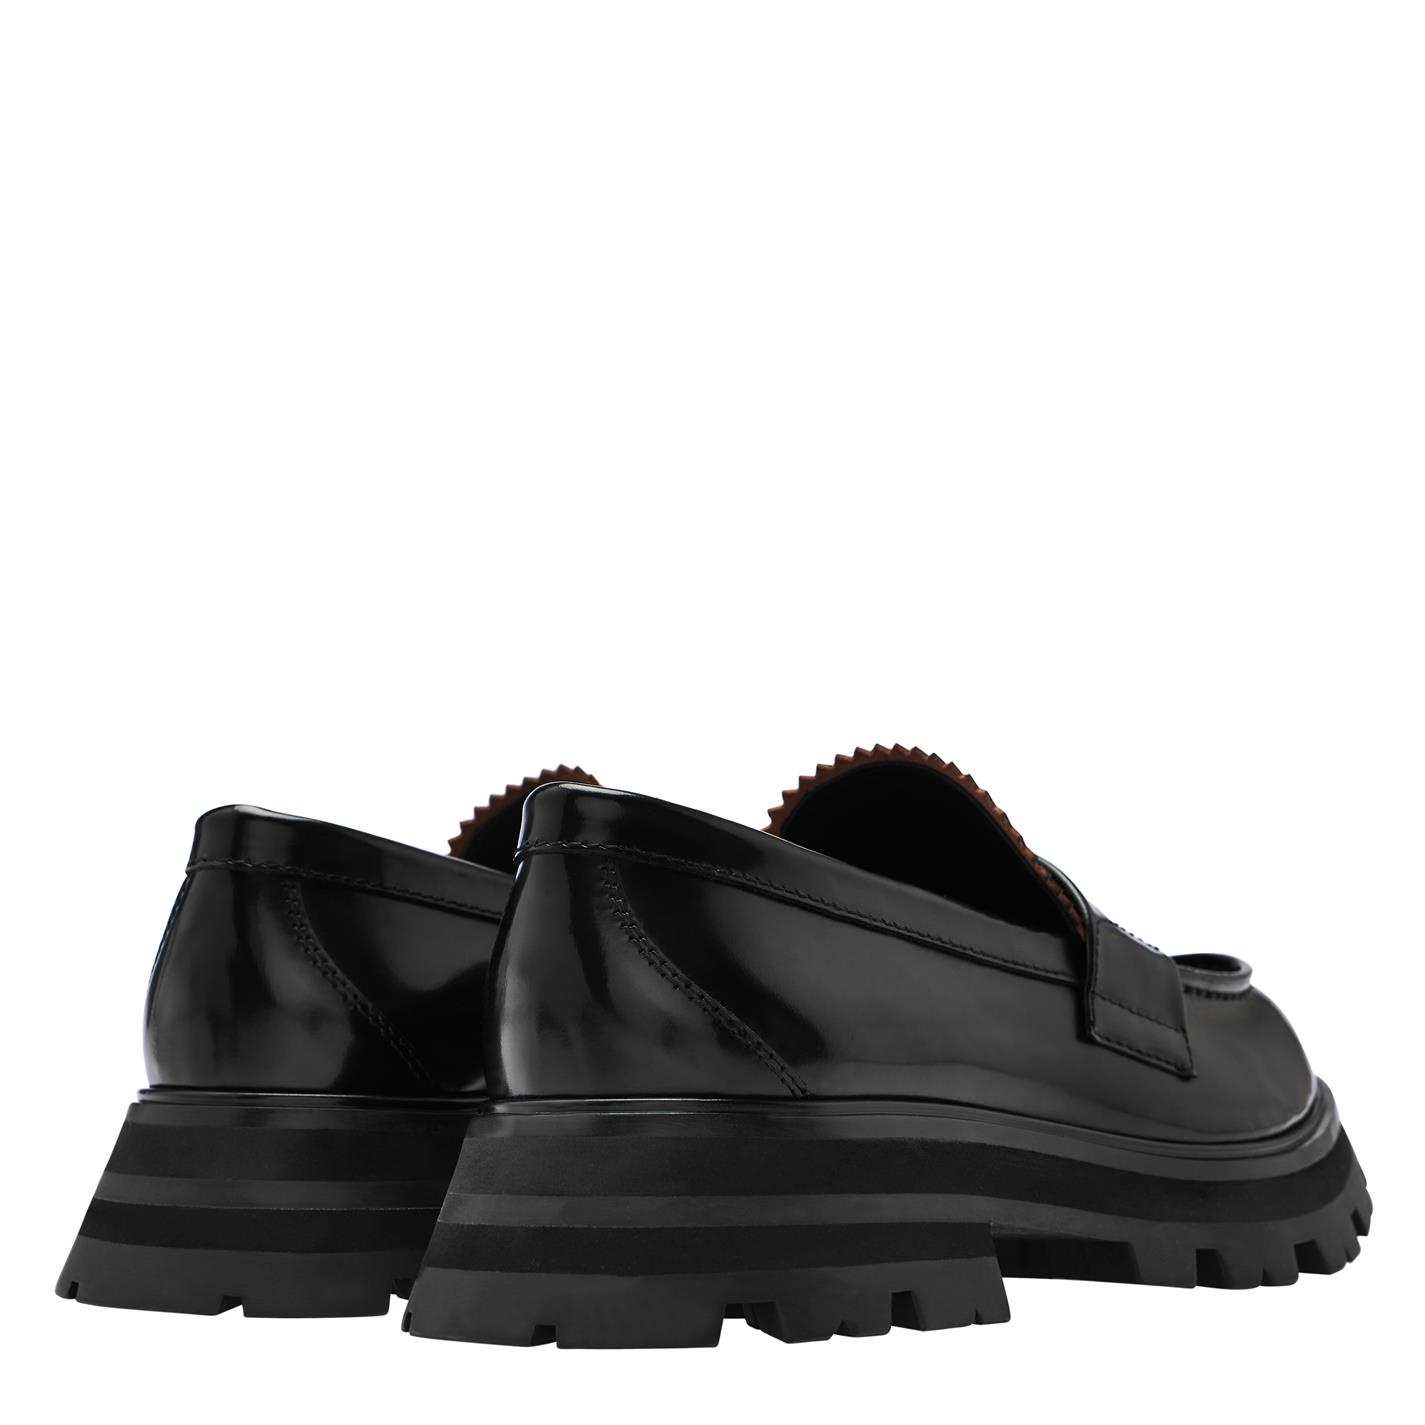 GLOSSY LOAFERS - 5